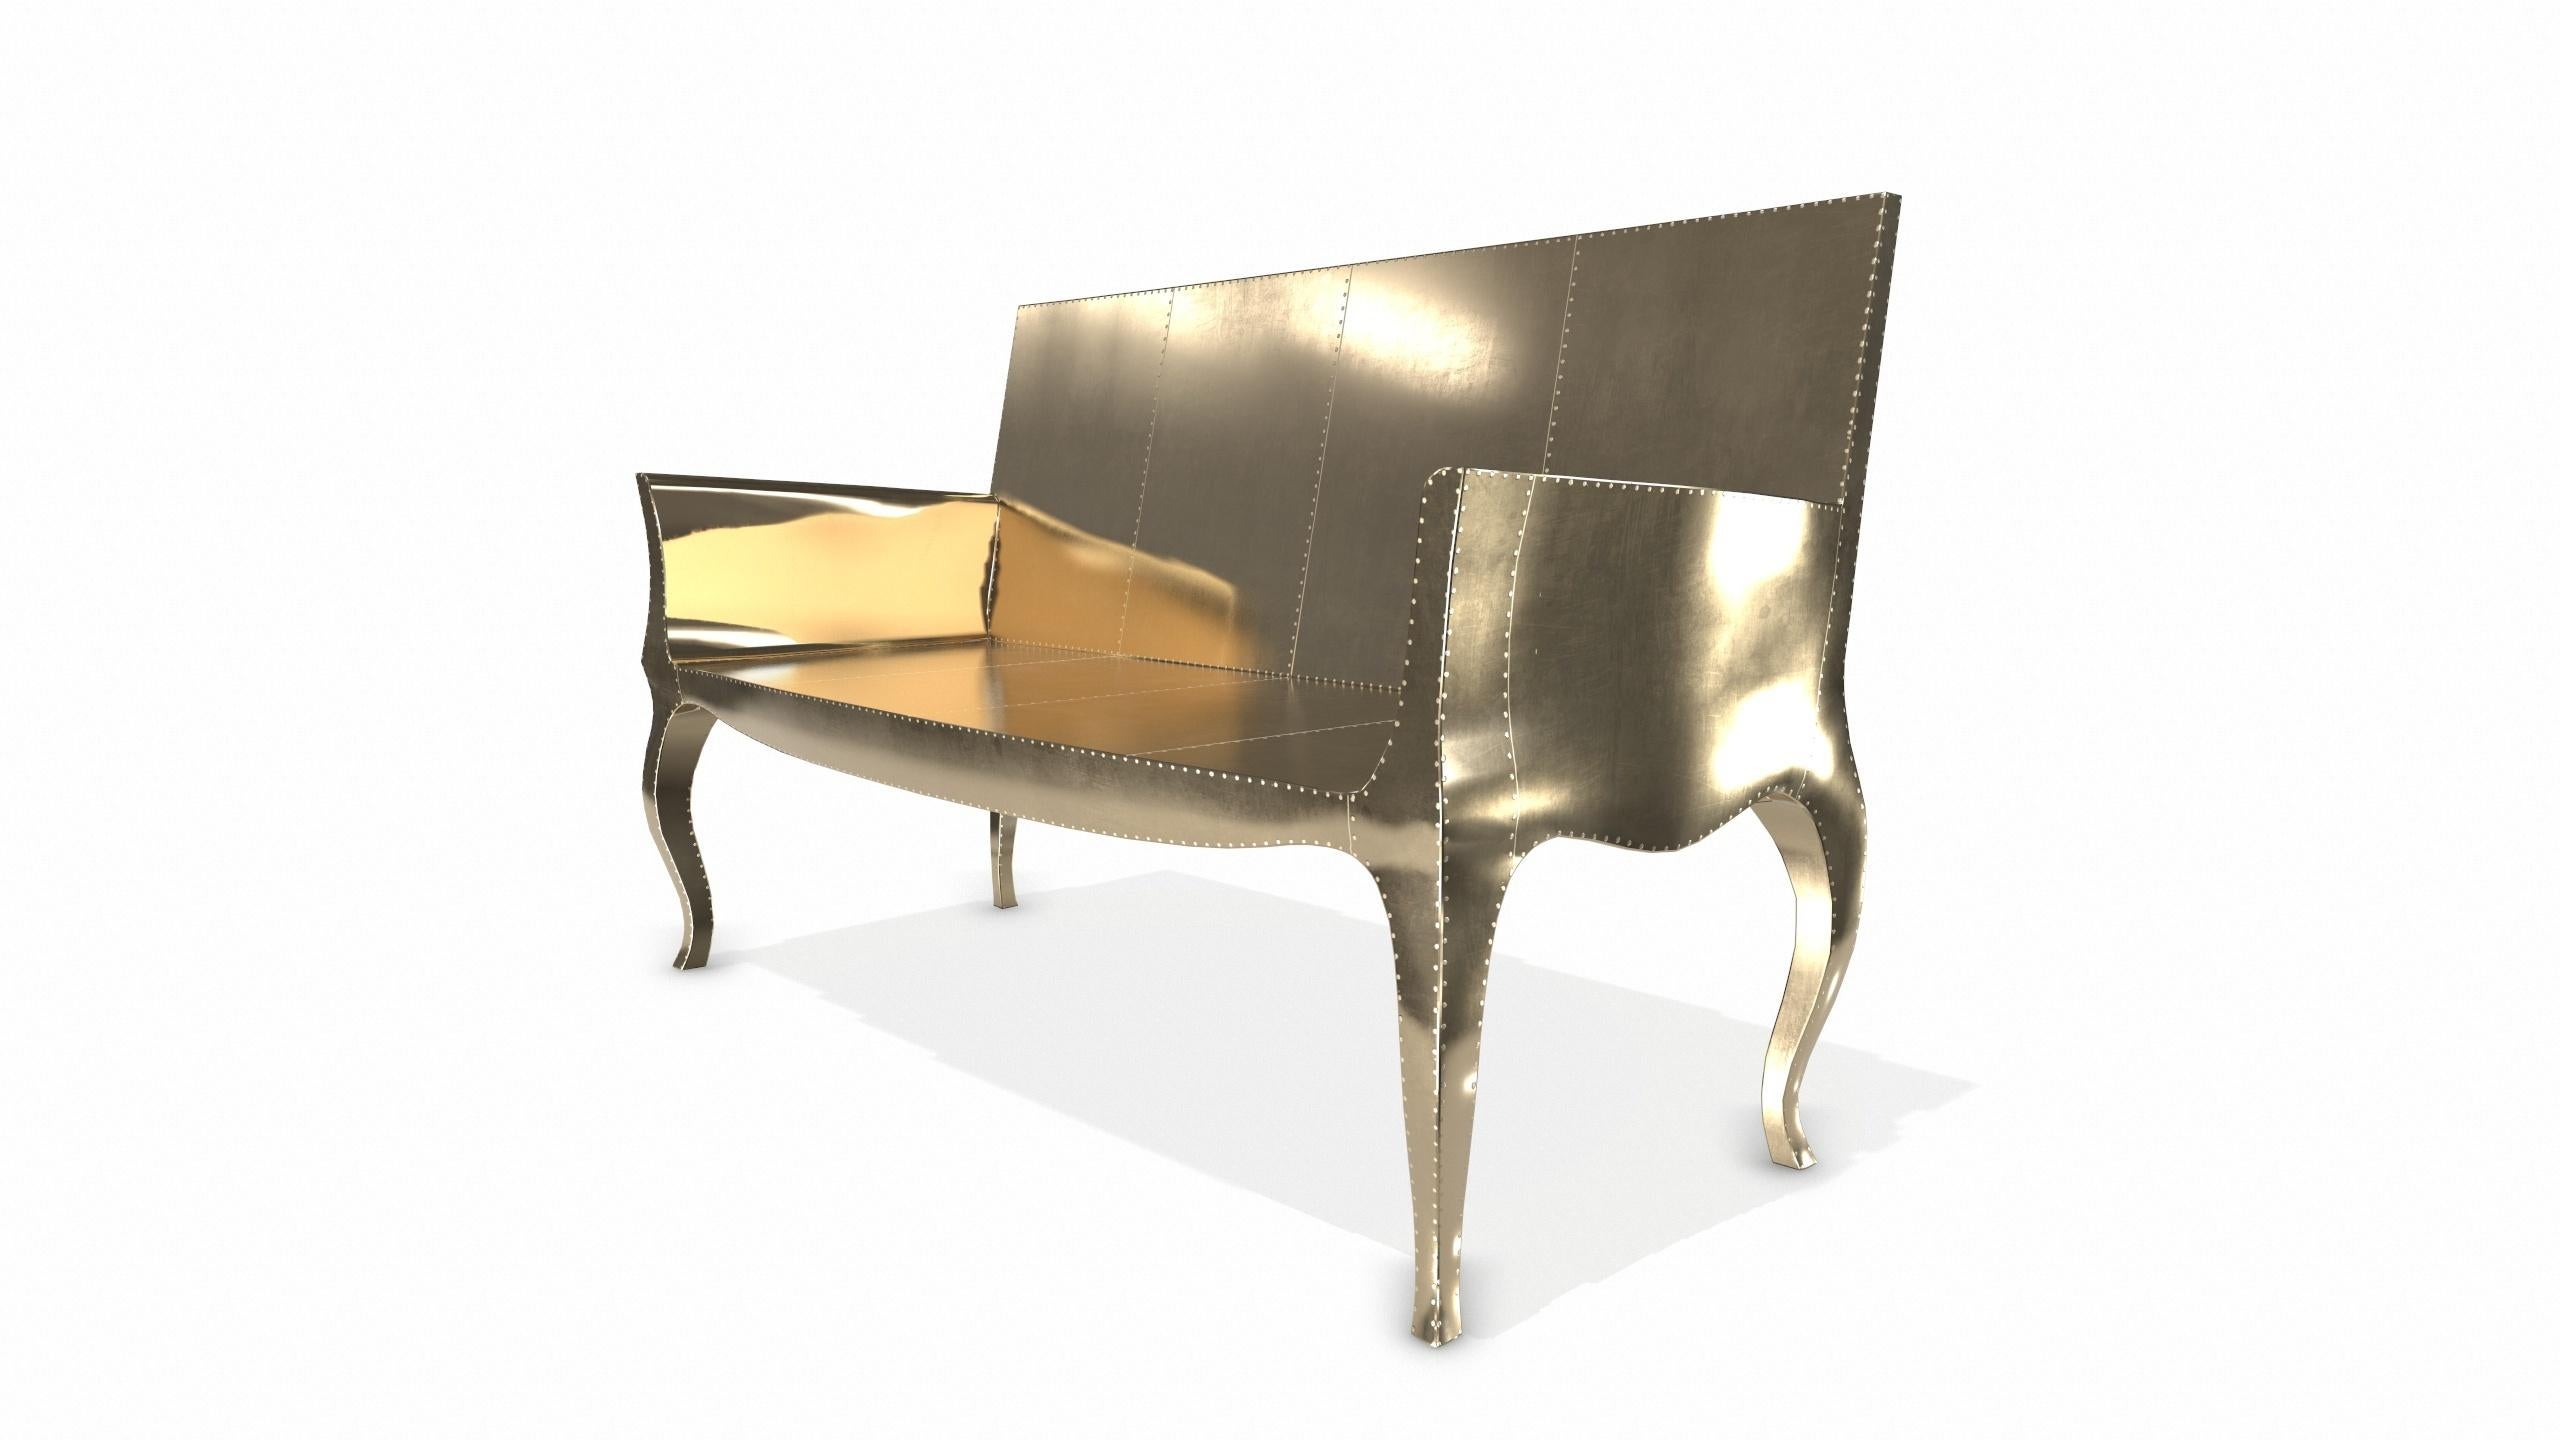 Hand-Crafted Louise Settee Art Deco Chaise Longues in Smooth Brass by Paul Mathieu For Sale